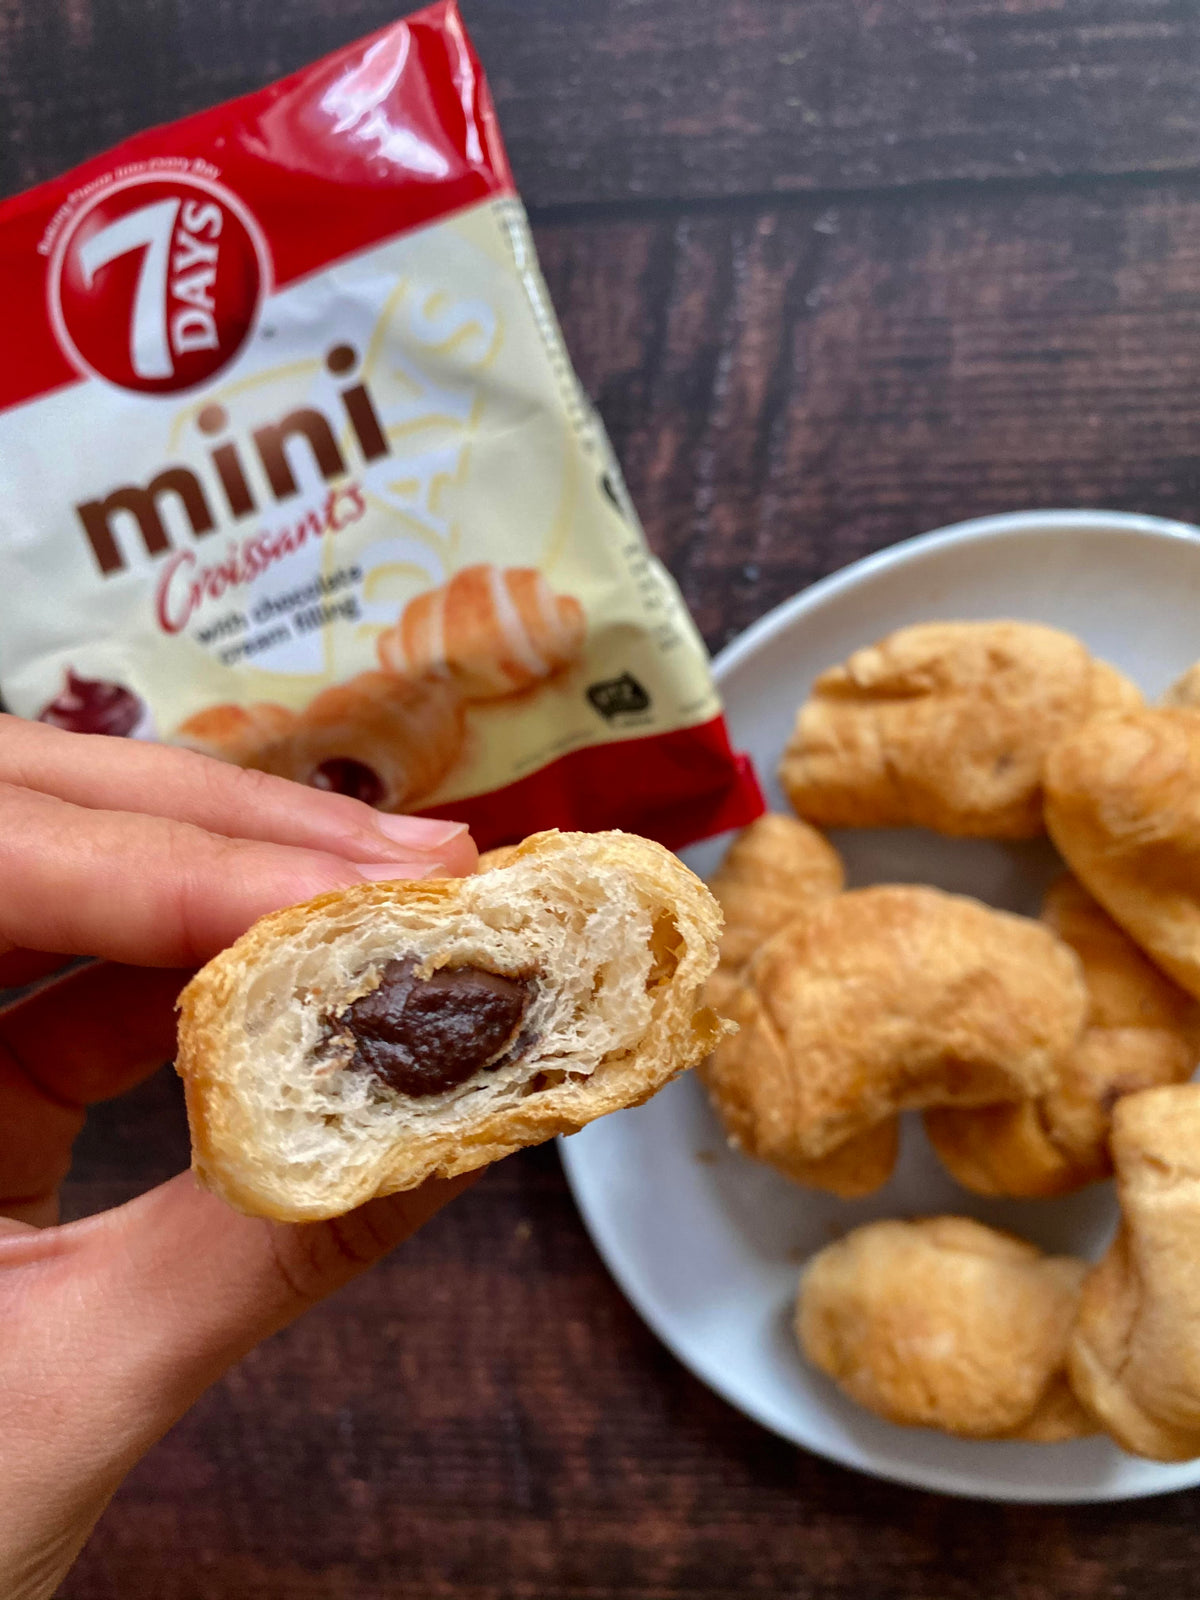 half of a mini chocolate croissant showing chocolate filling